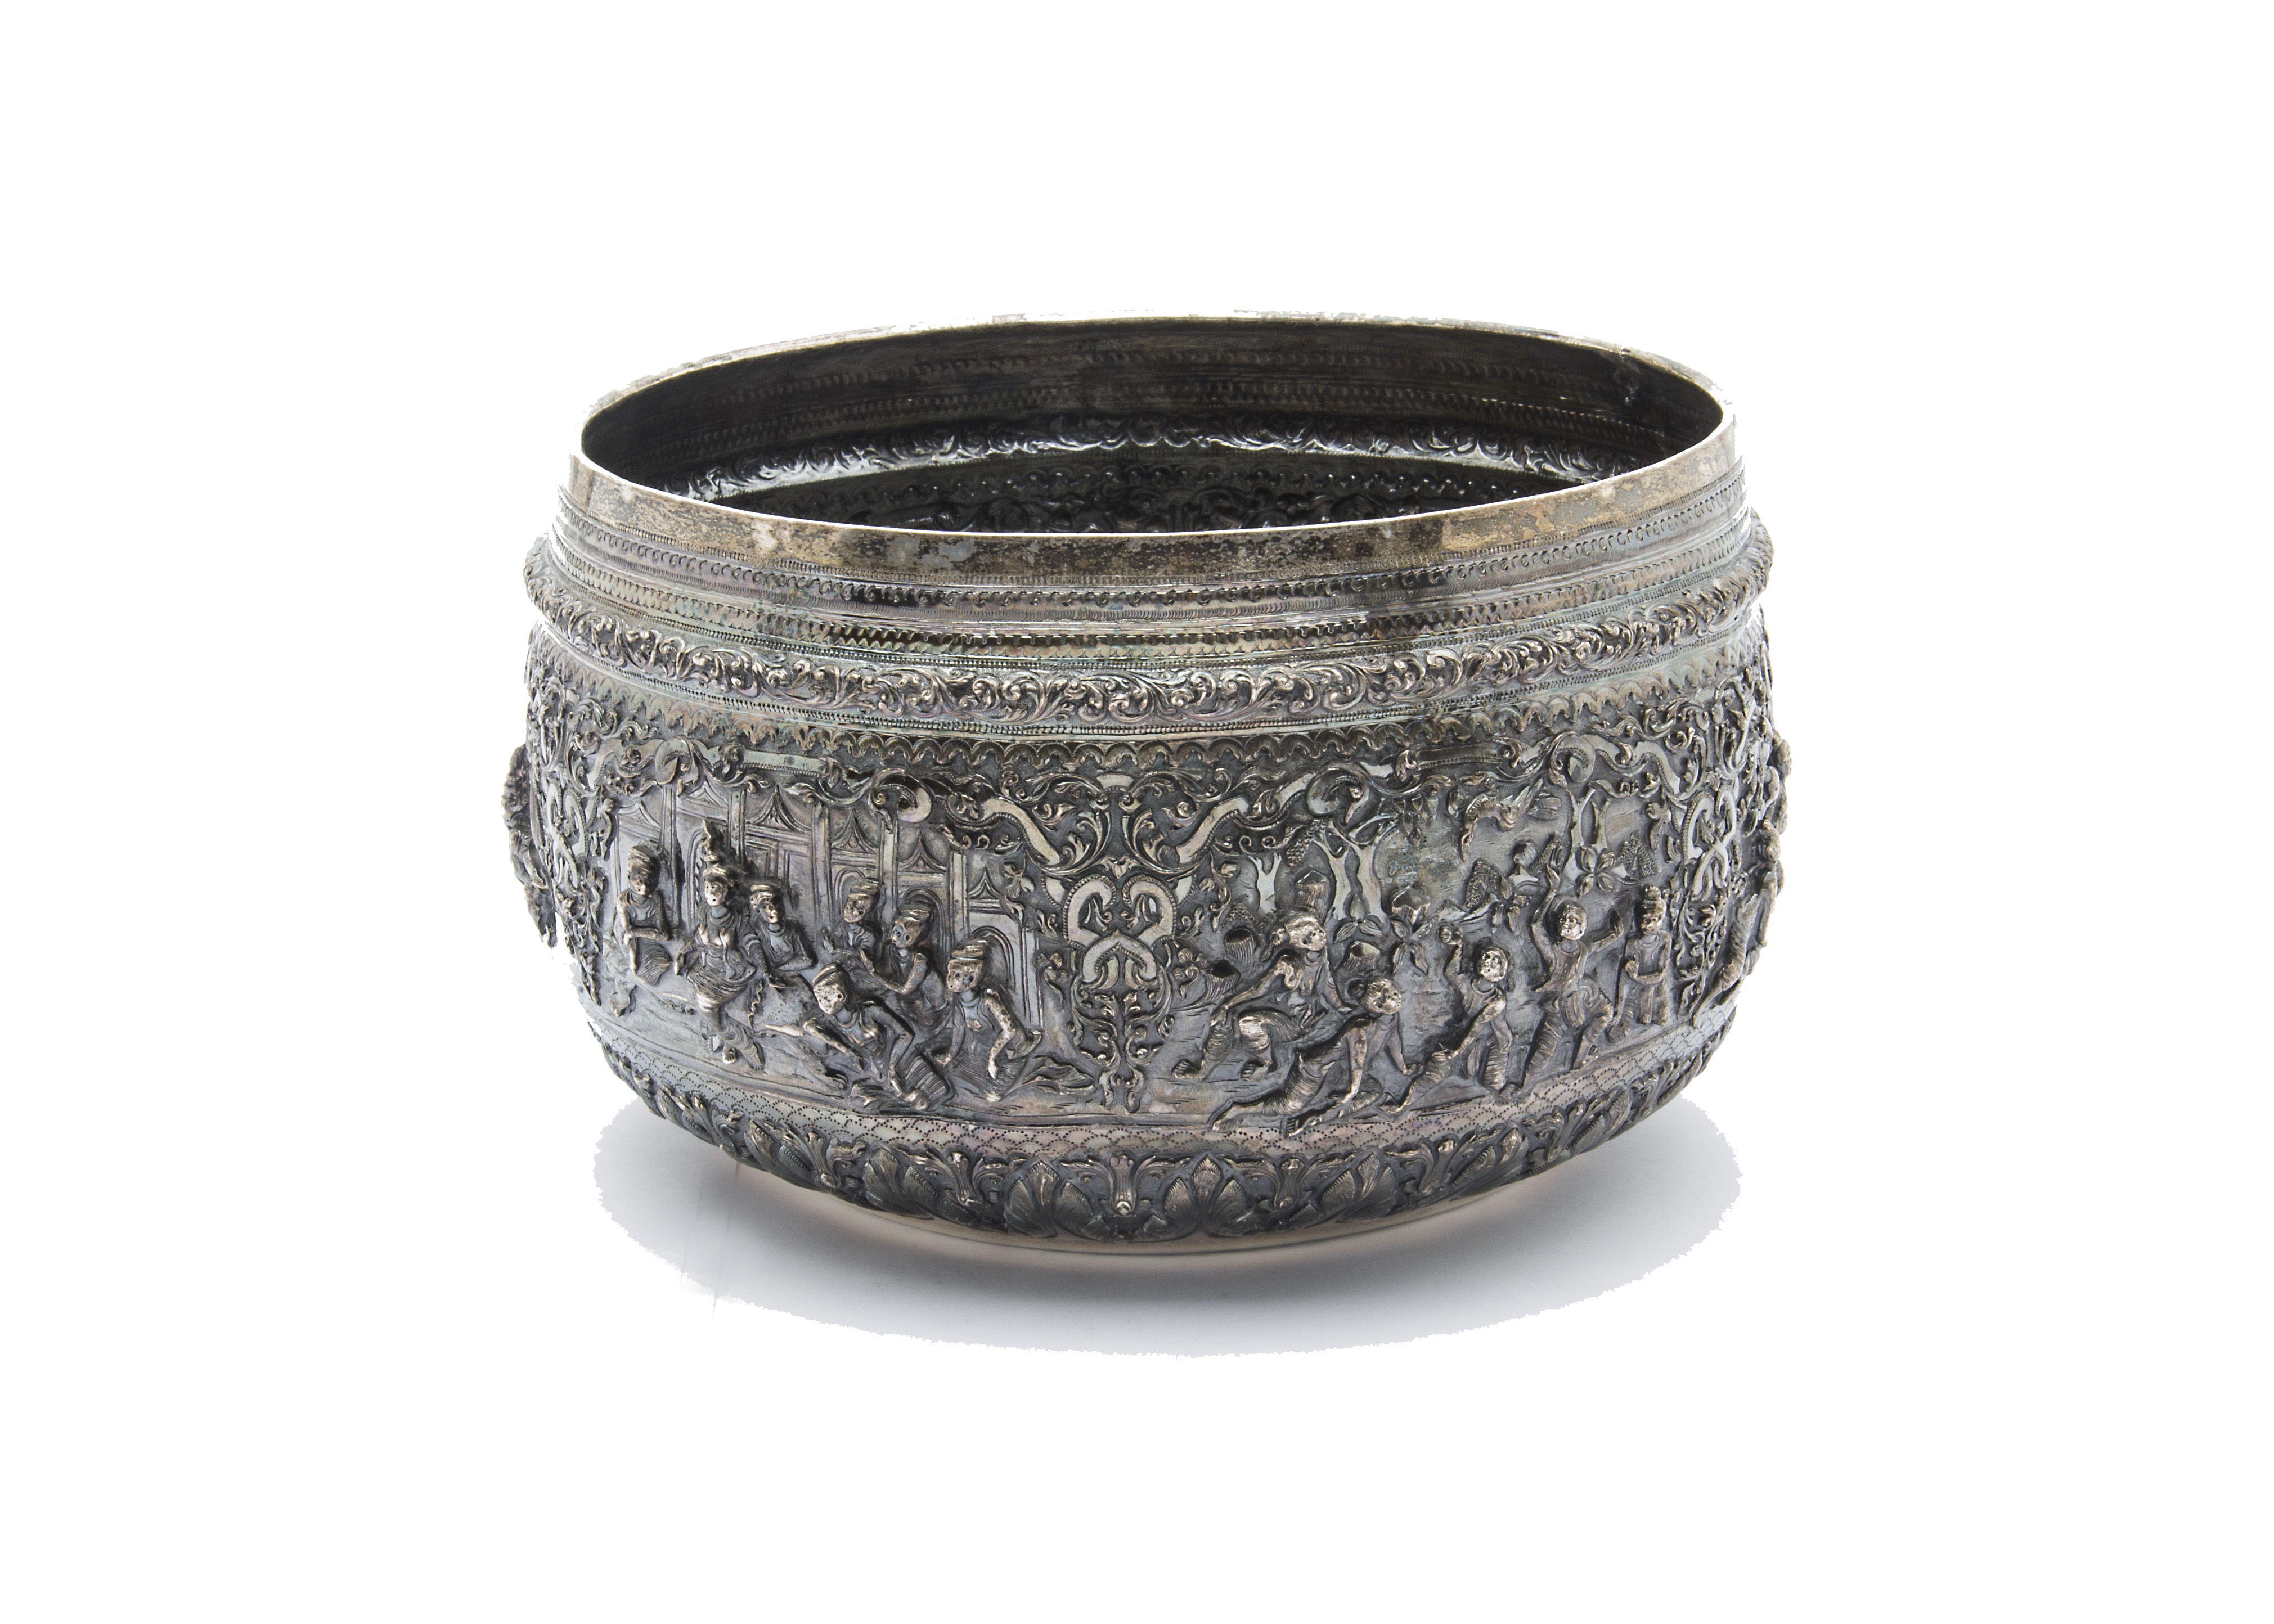 A large 19th century Indian silver bowl, having intricate embossed scenes of figures with ornate